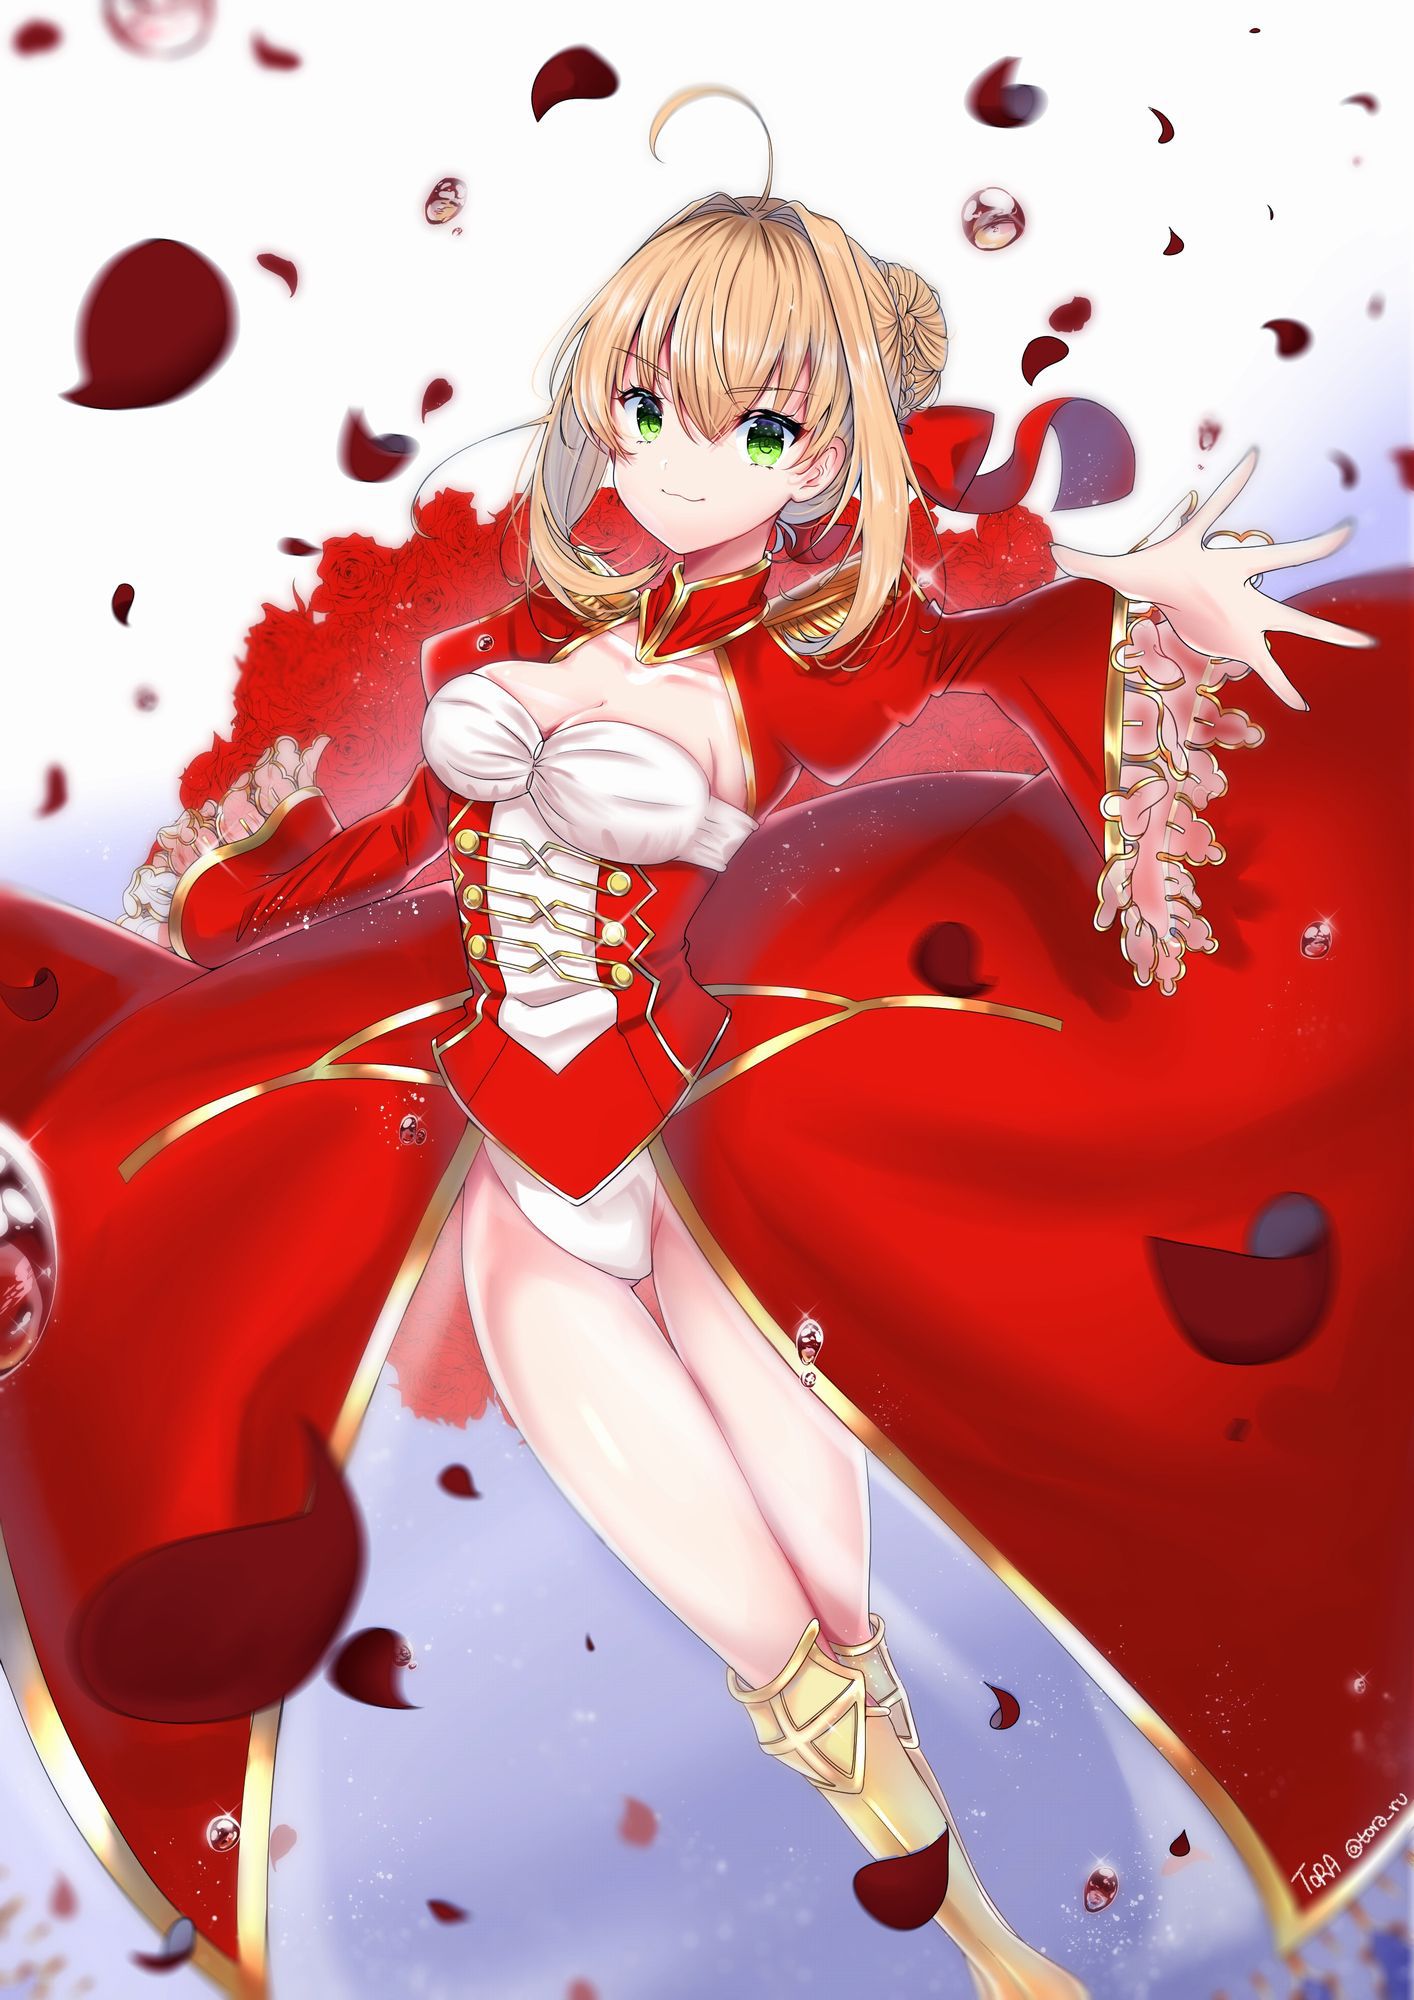 [Secondary ZIP] is about to start anime 100 pieces of cute image summary of Nero Claudius so soon 9